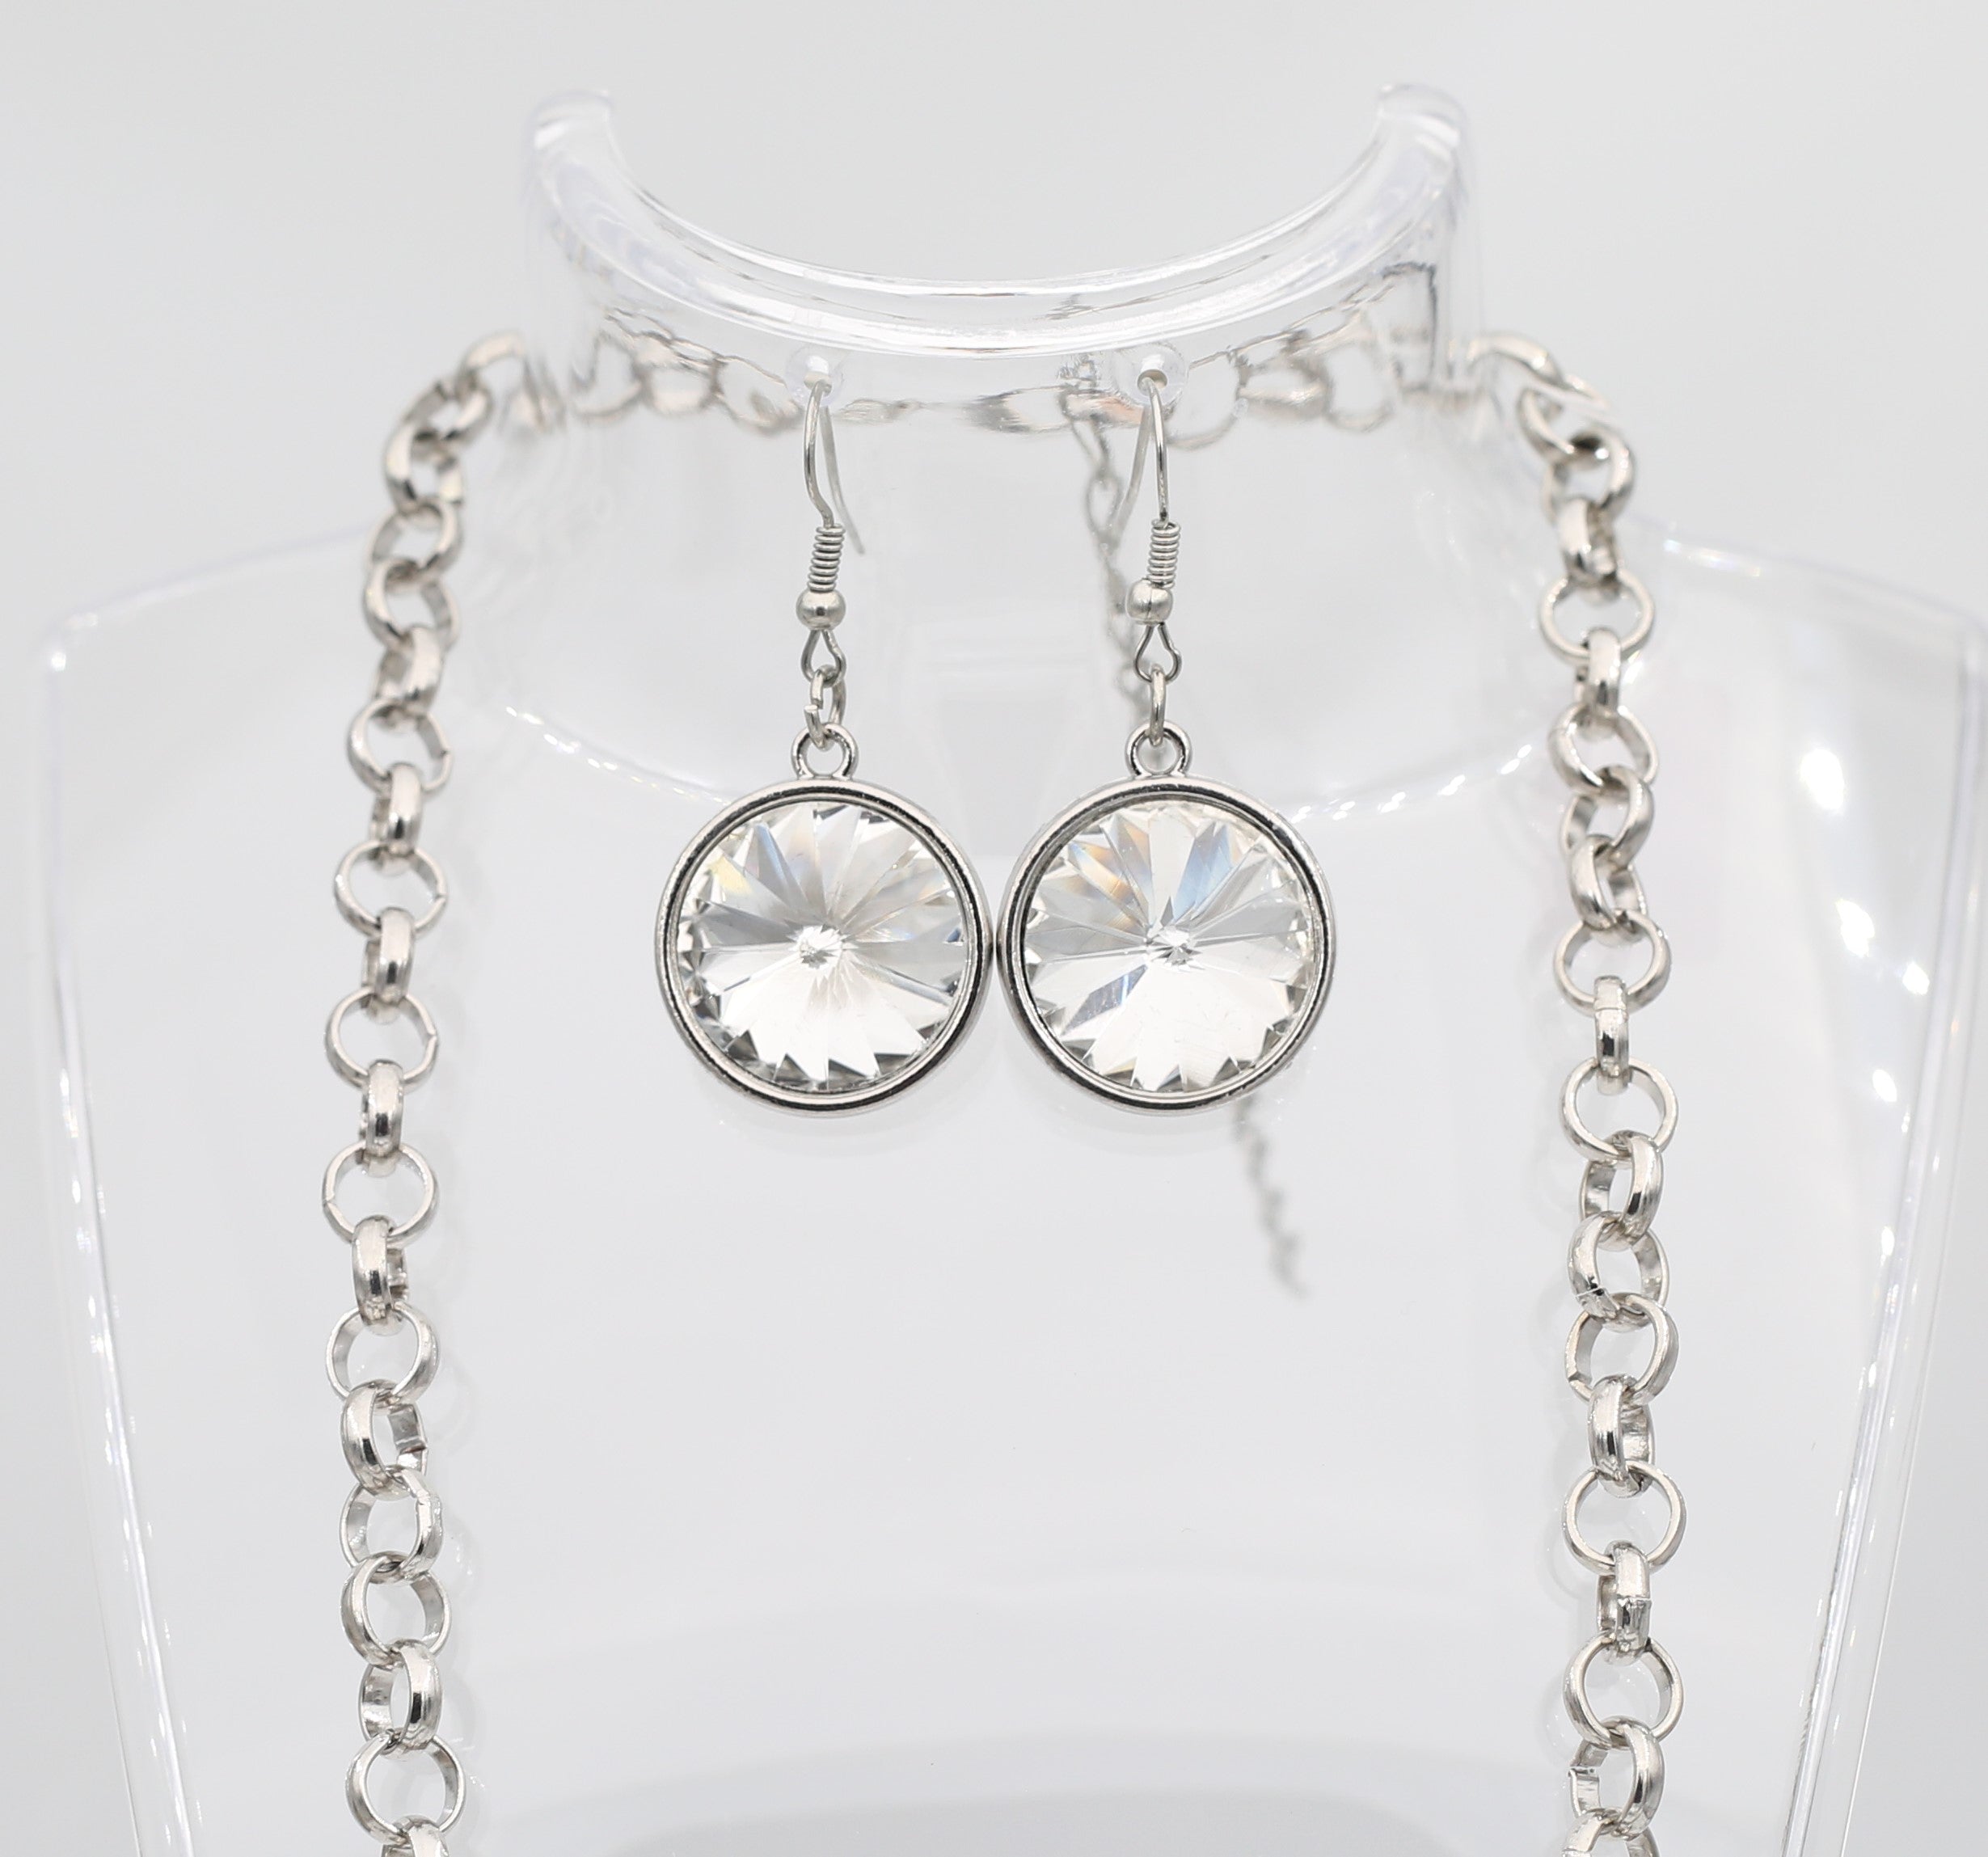 Silver Tone With Cubic Zirconia Diamond Earrings & Necklac